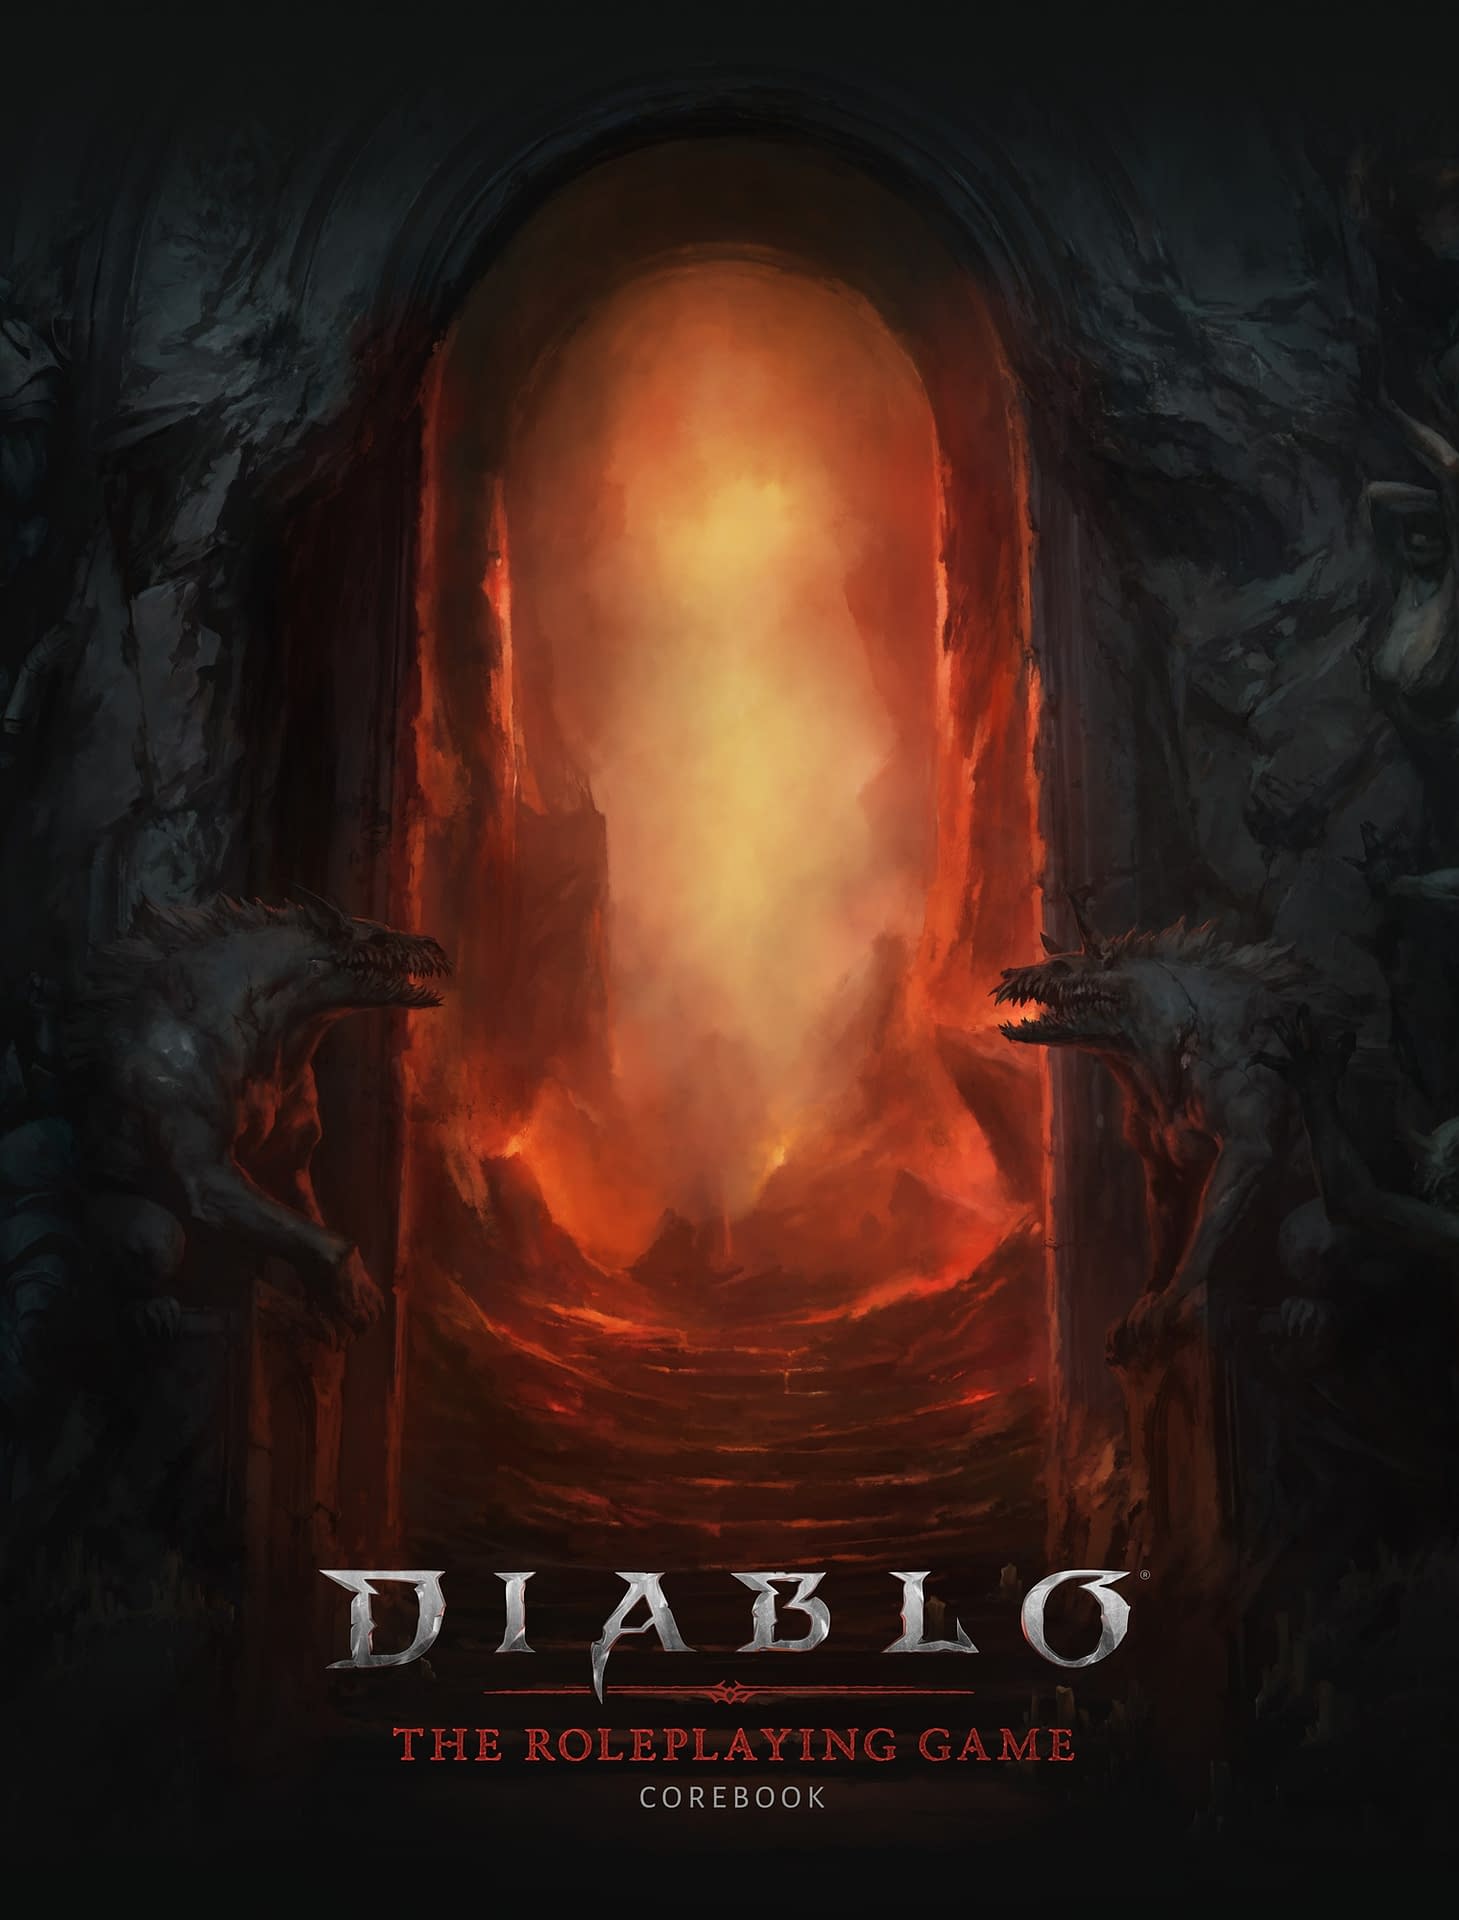 A Diablo board game and tabletop RPG are on the way